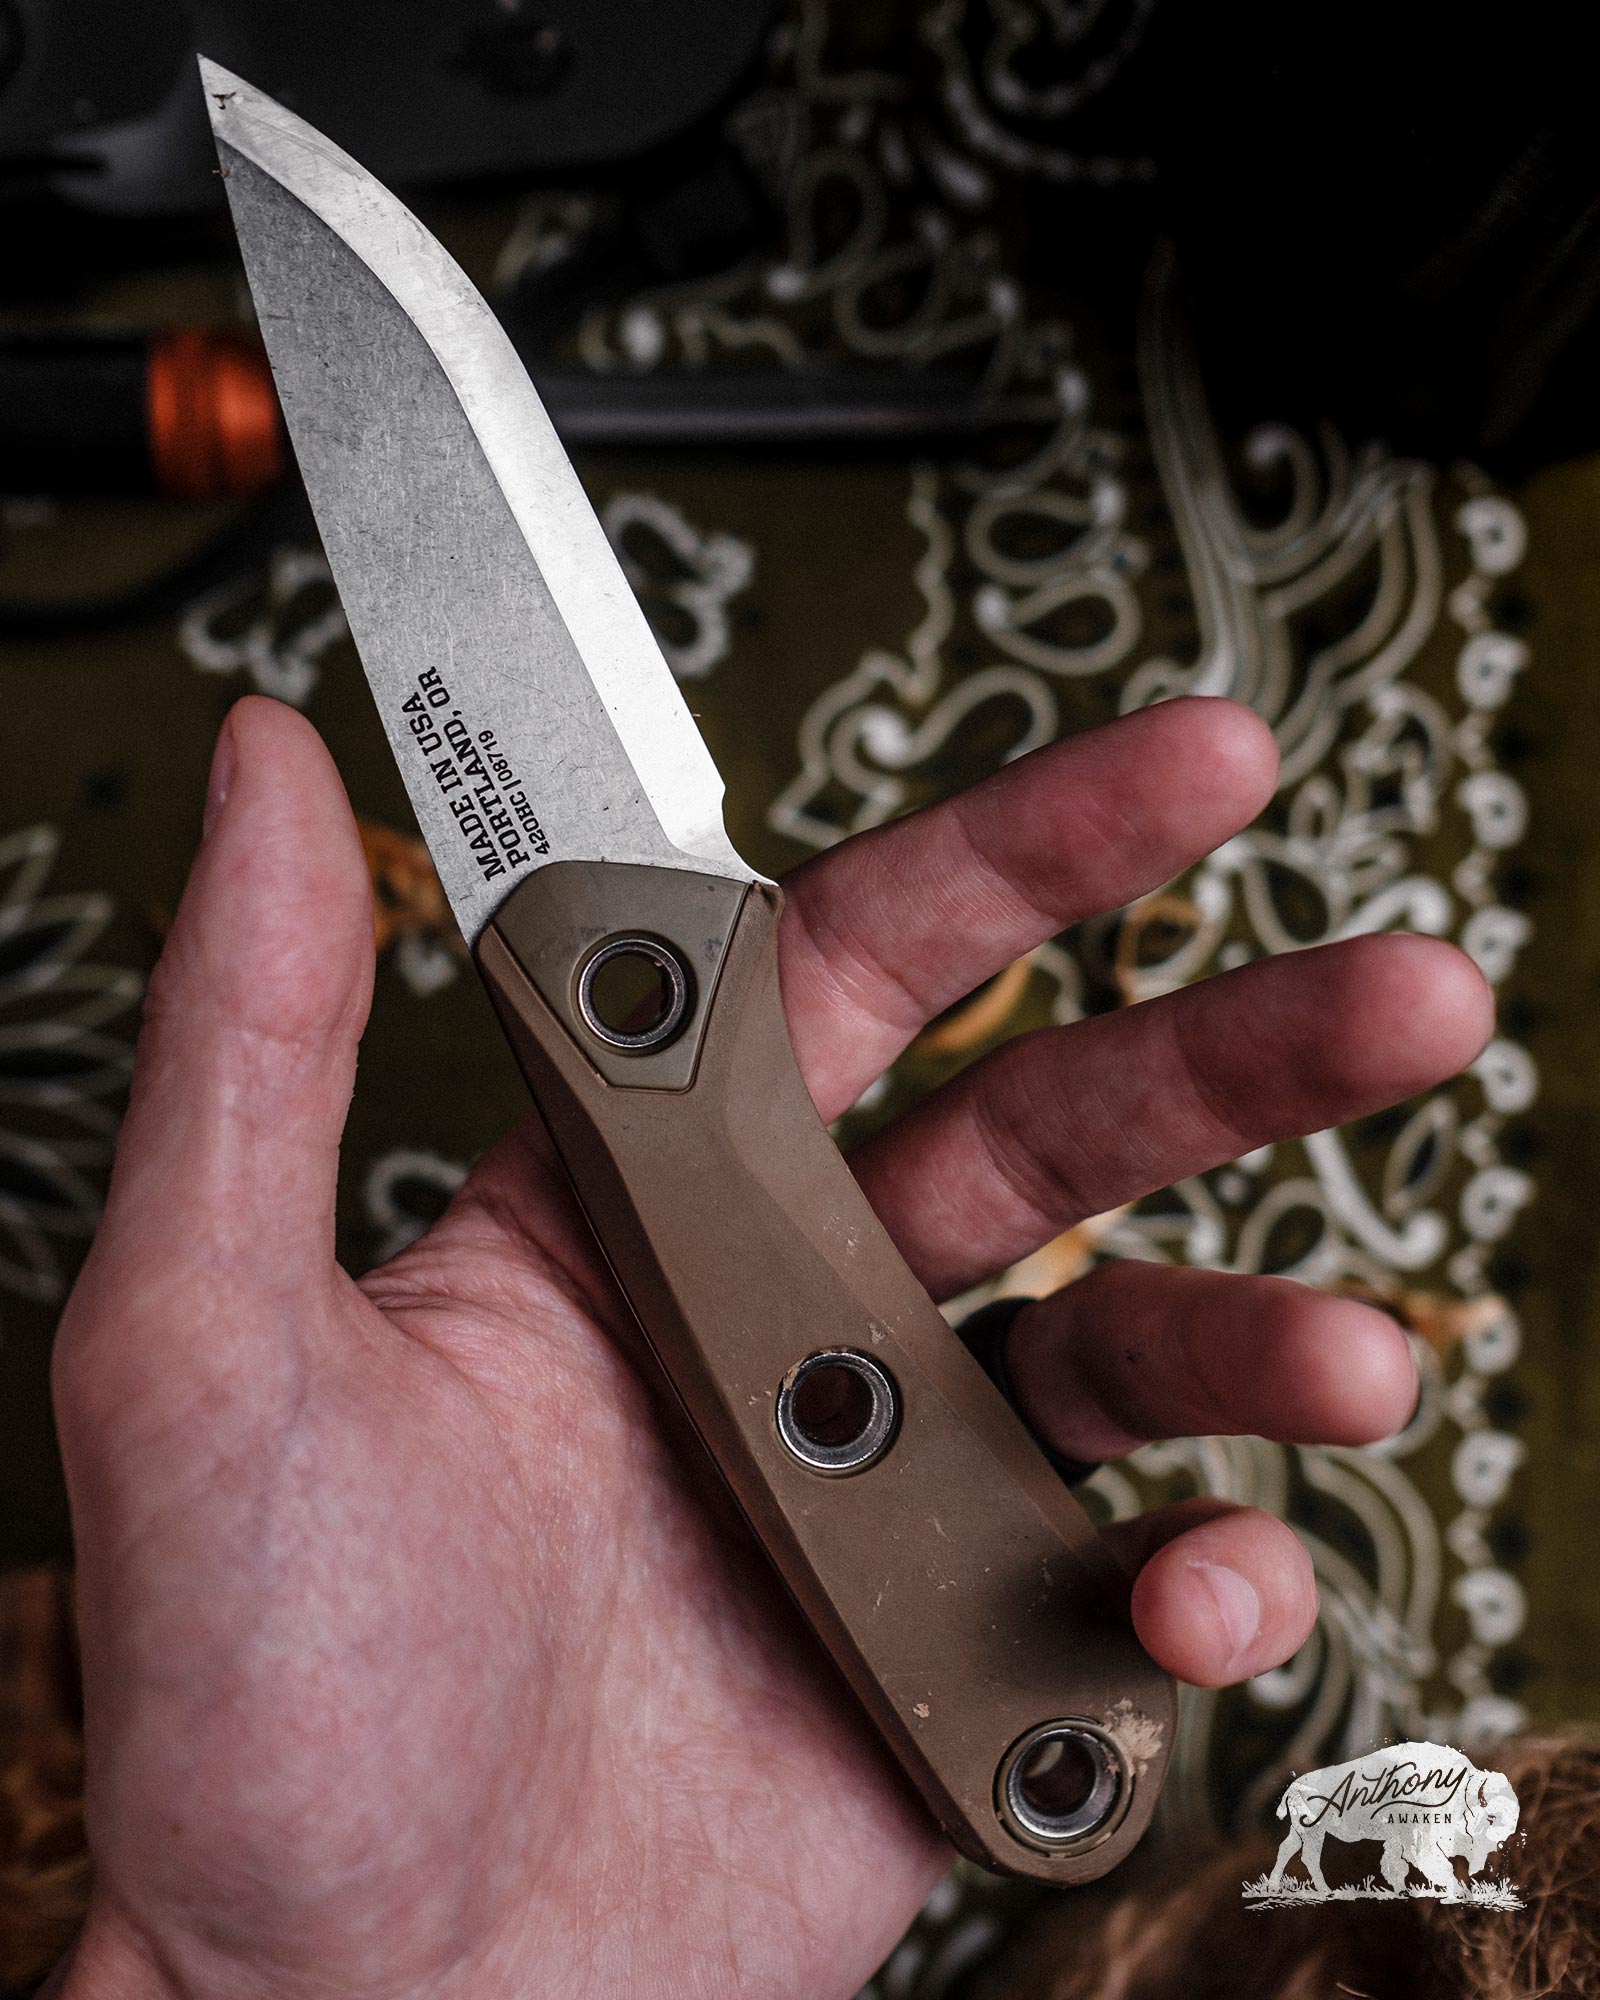 A Really Good Knife, in Theory: Gerber Spire Review